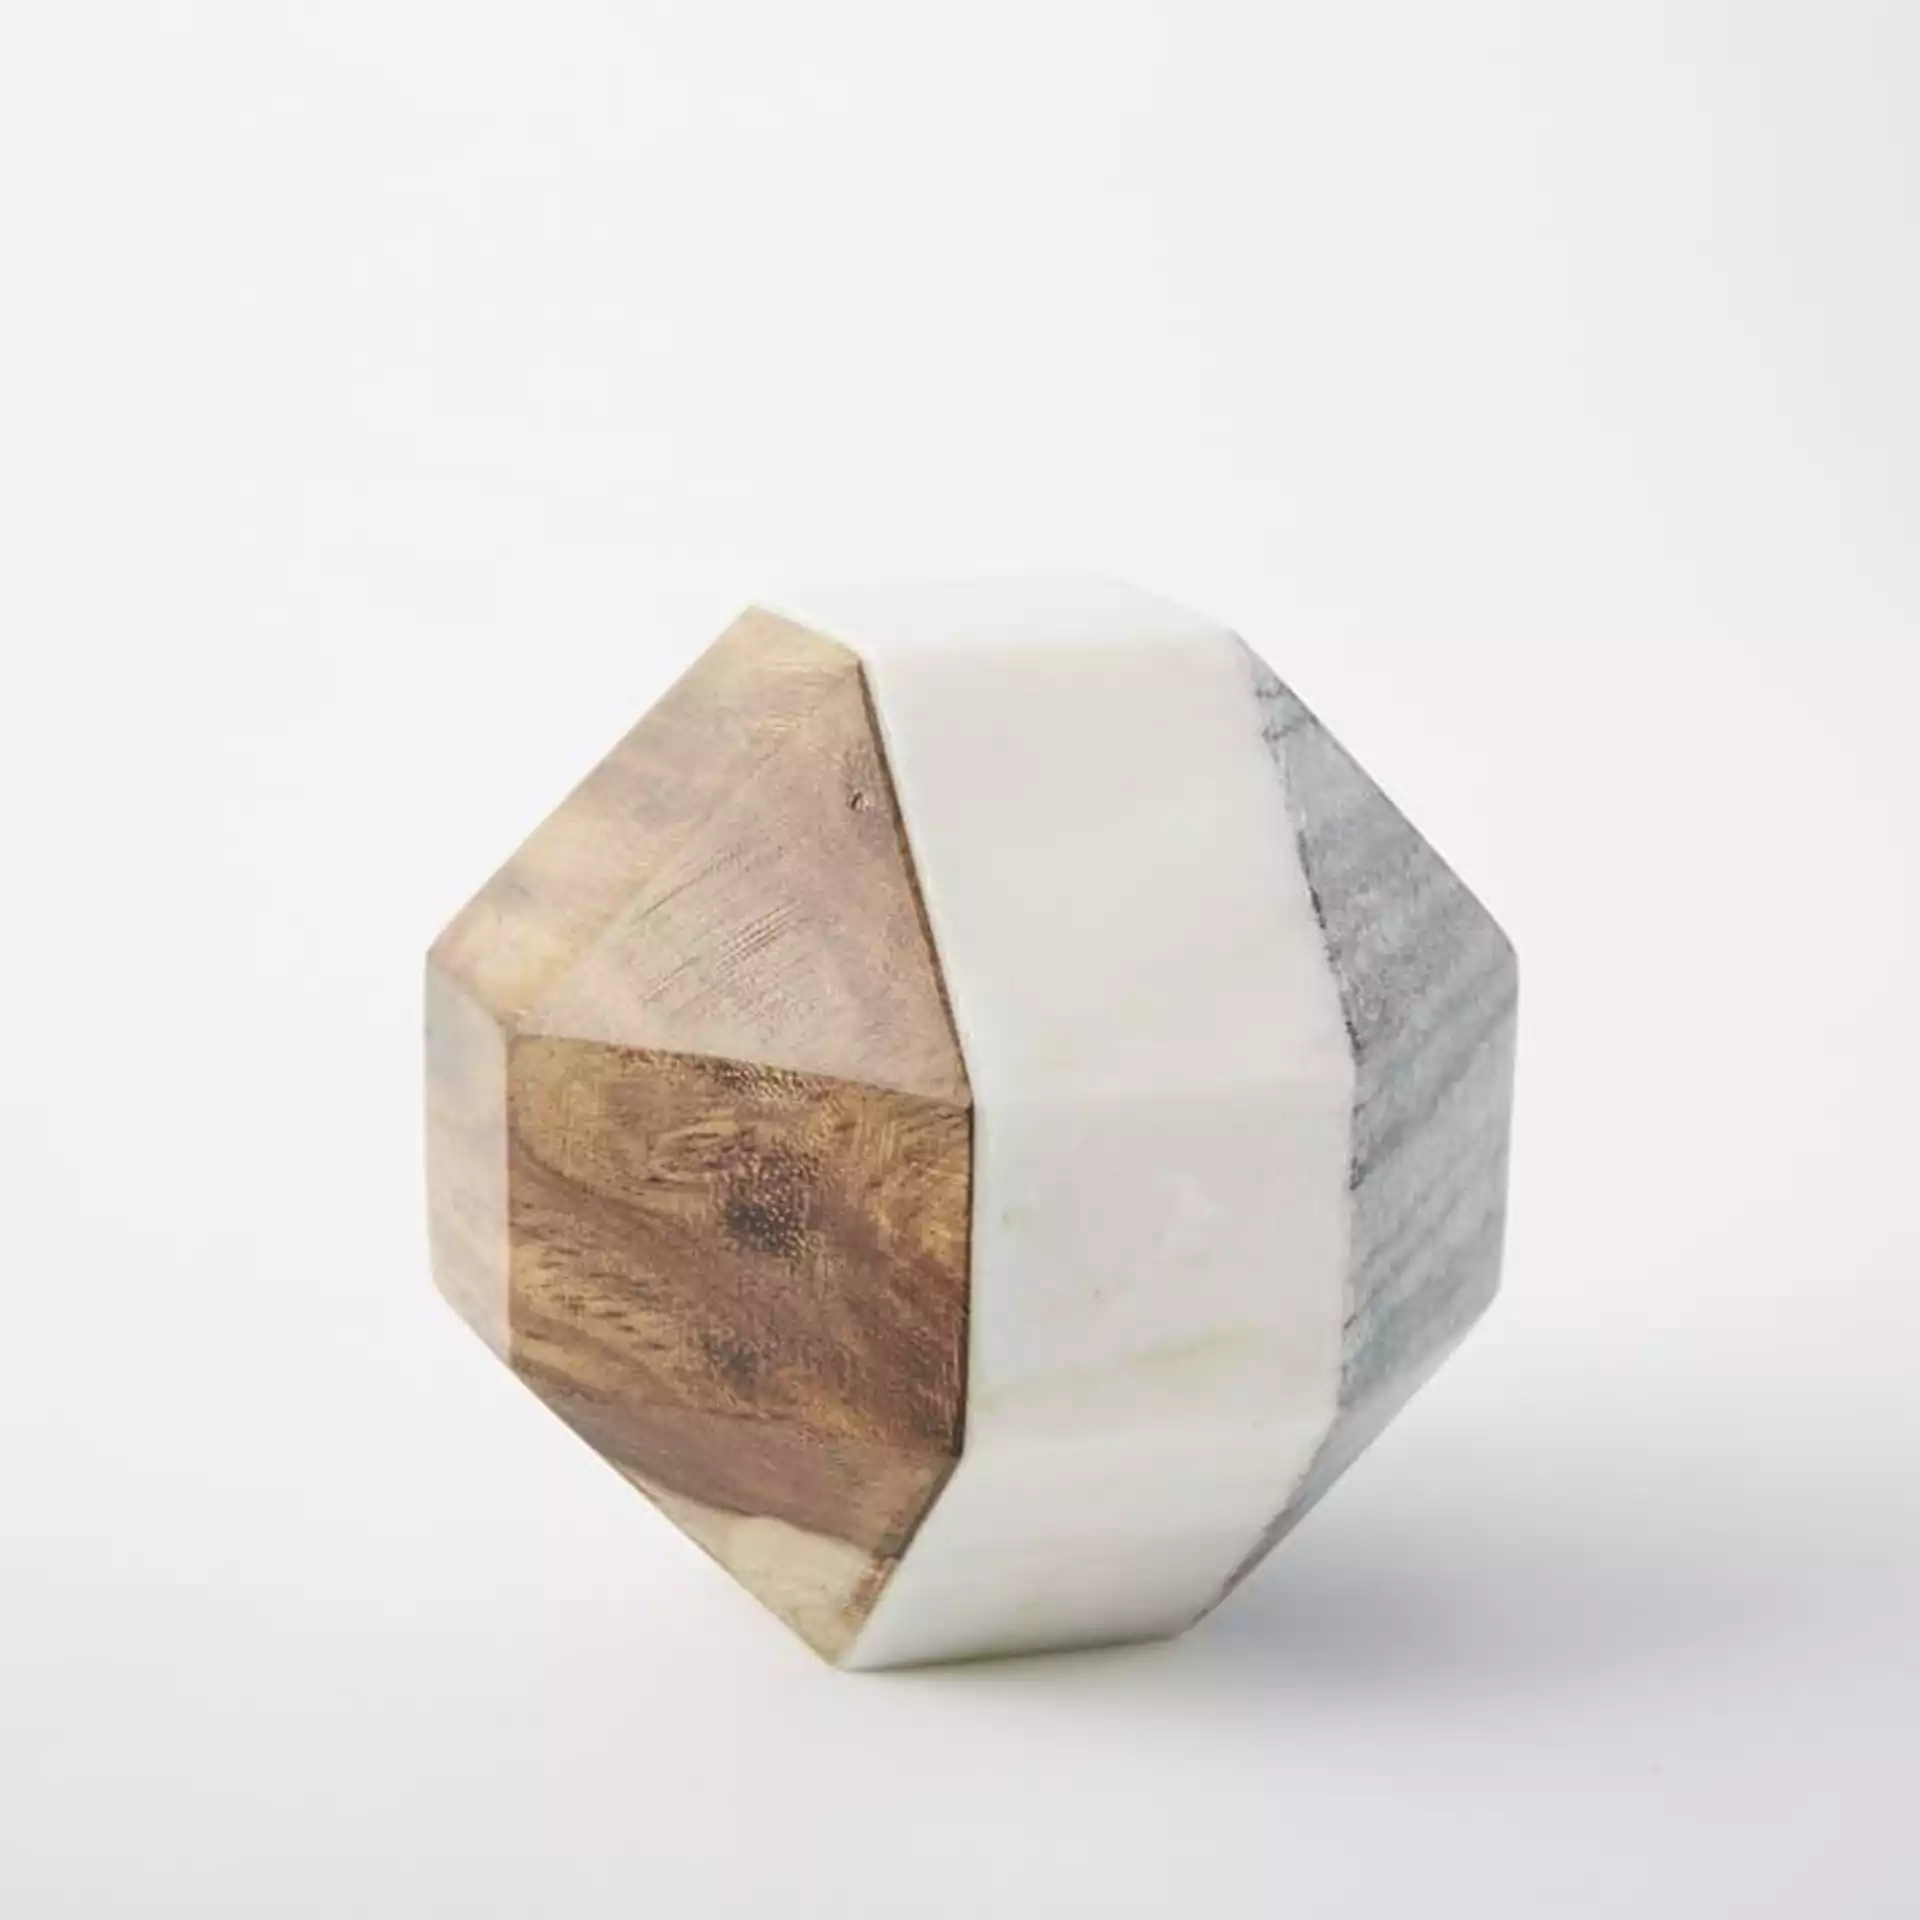 Marble & Wood Object, Small Octahedron